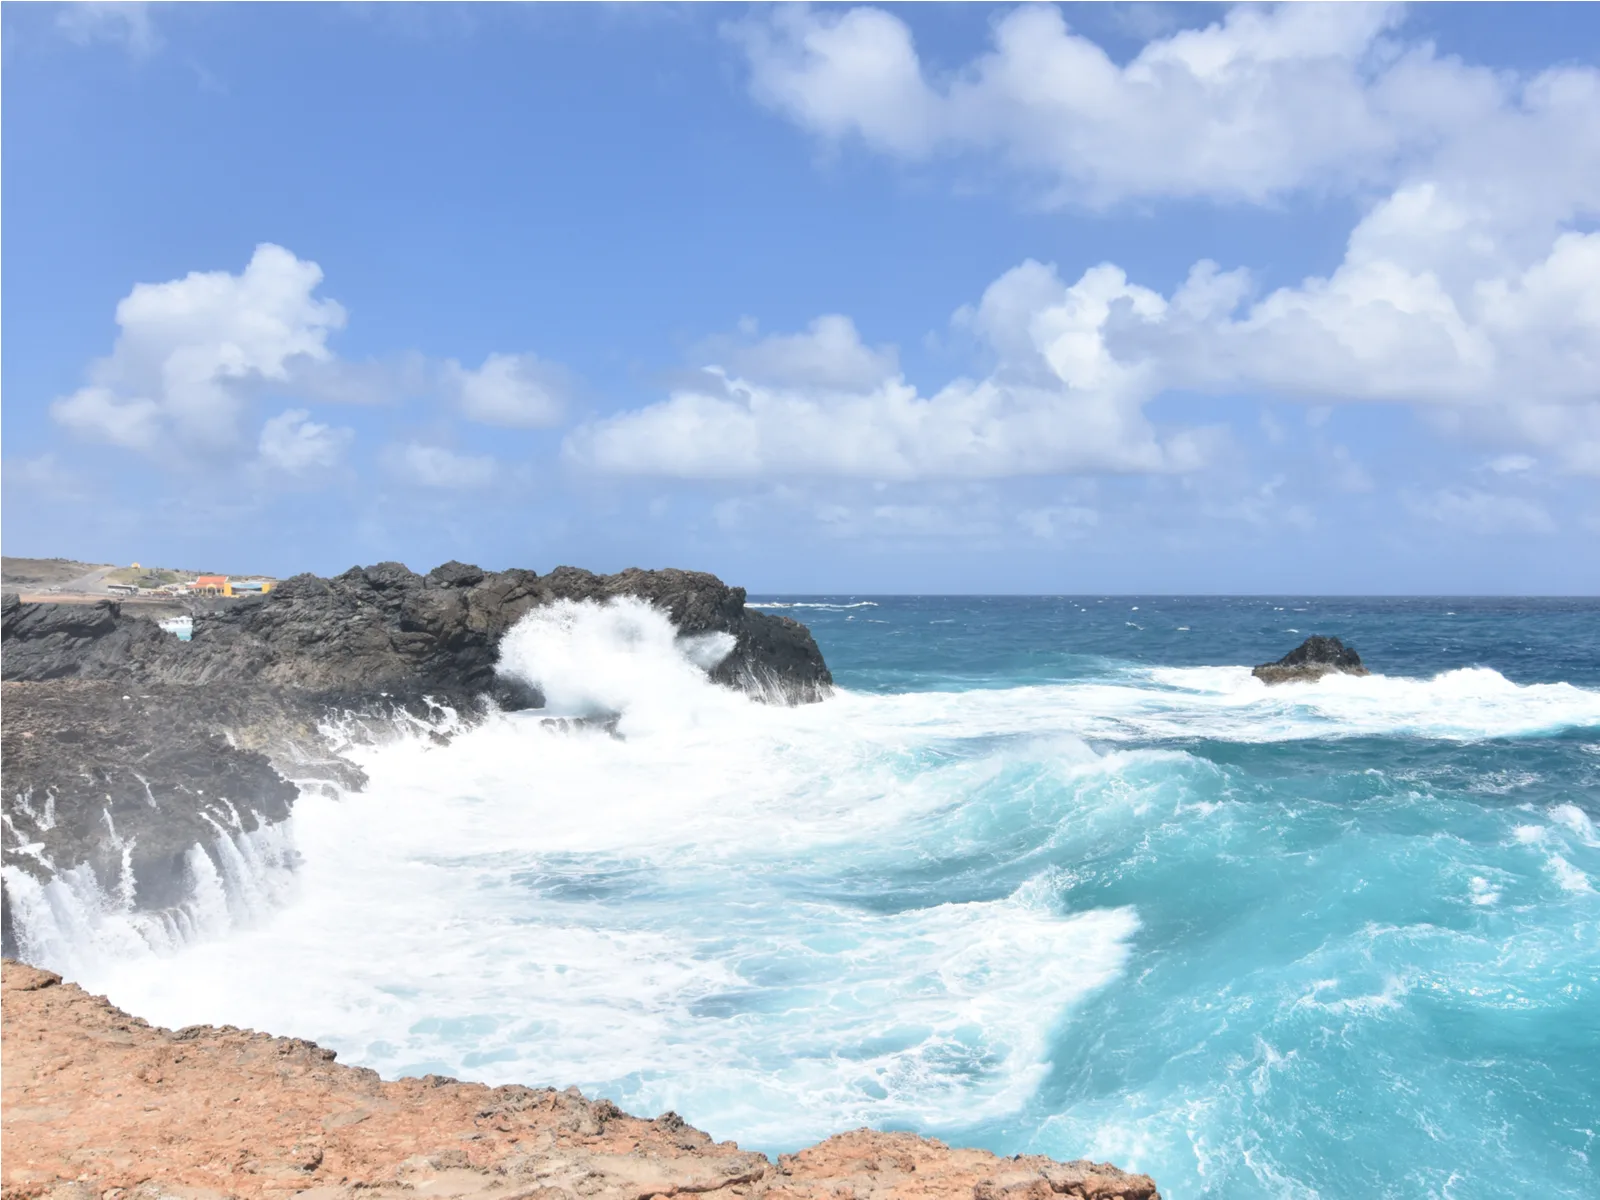 Strong waves smashing on the rocky coast of Andicuri Beach, one of the best beaches in Aruba